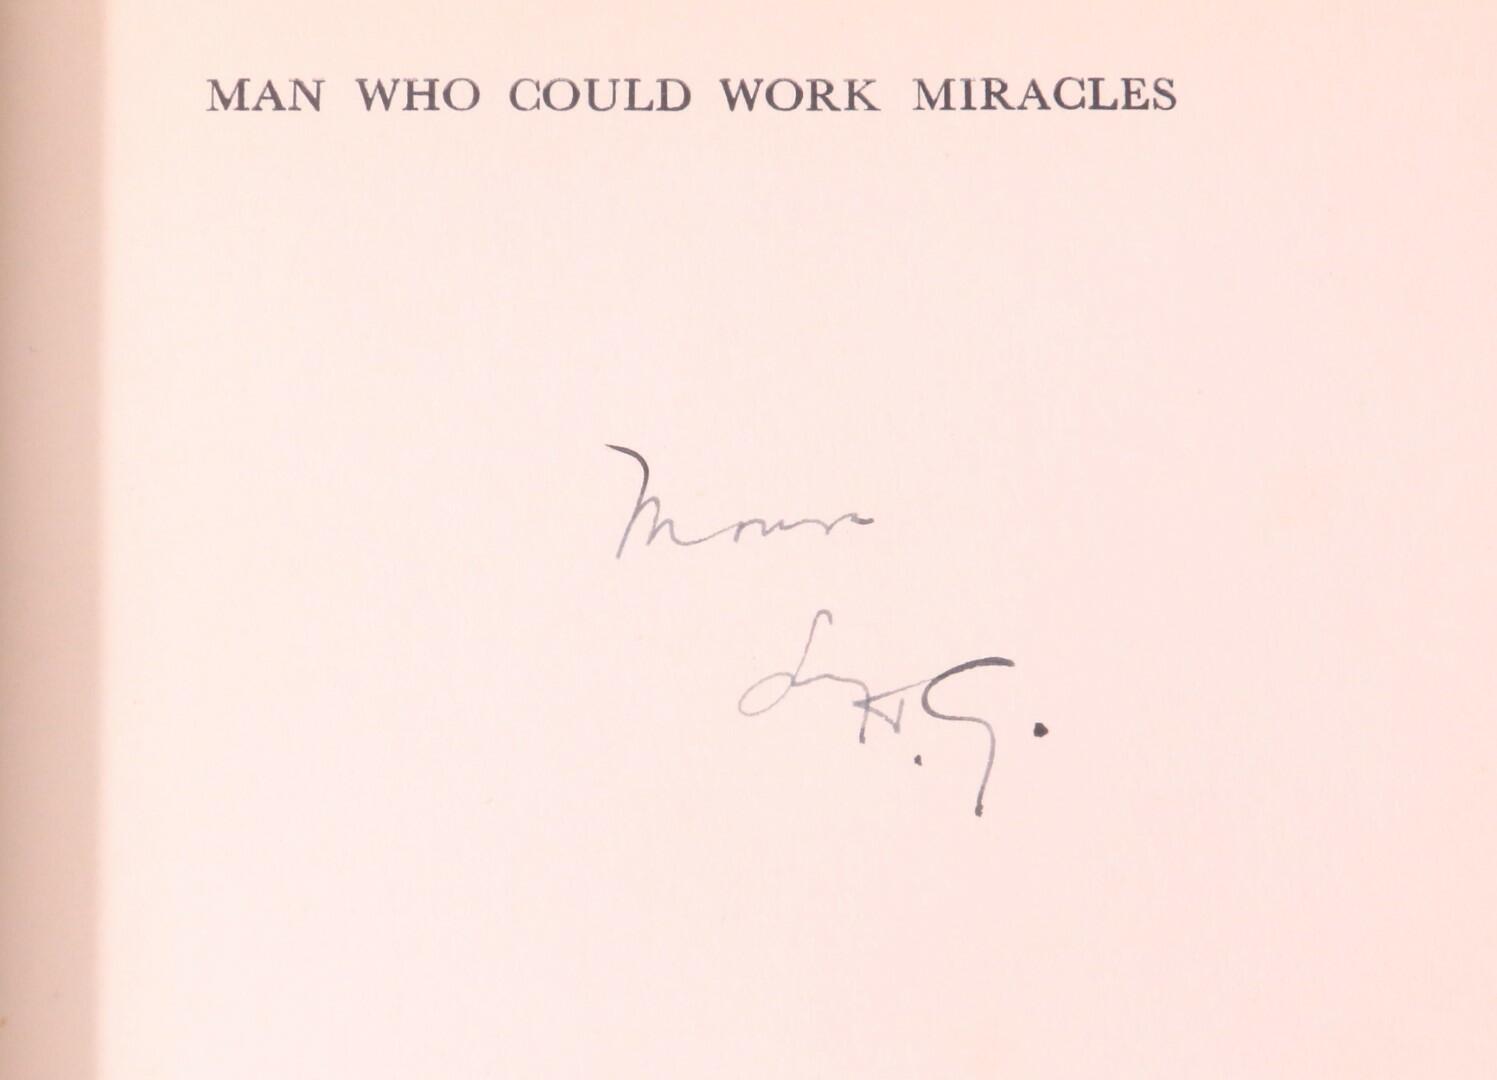 H.G. Wells - Man Who Could Work Miracles. - Cresset Press, 1936, Signed First Edition.